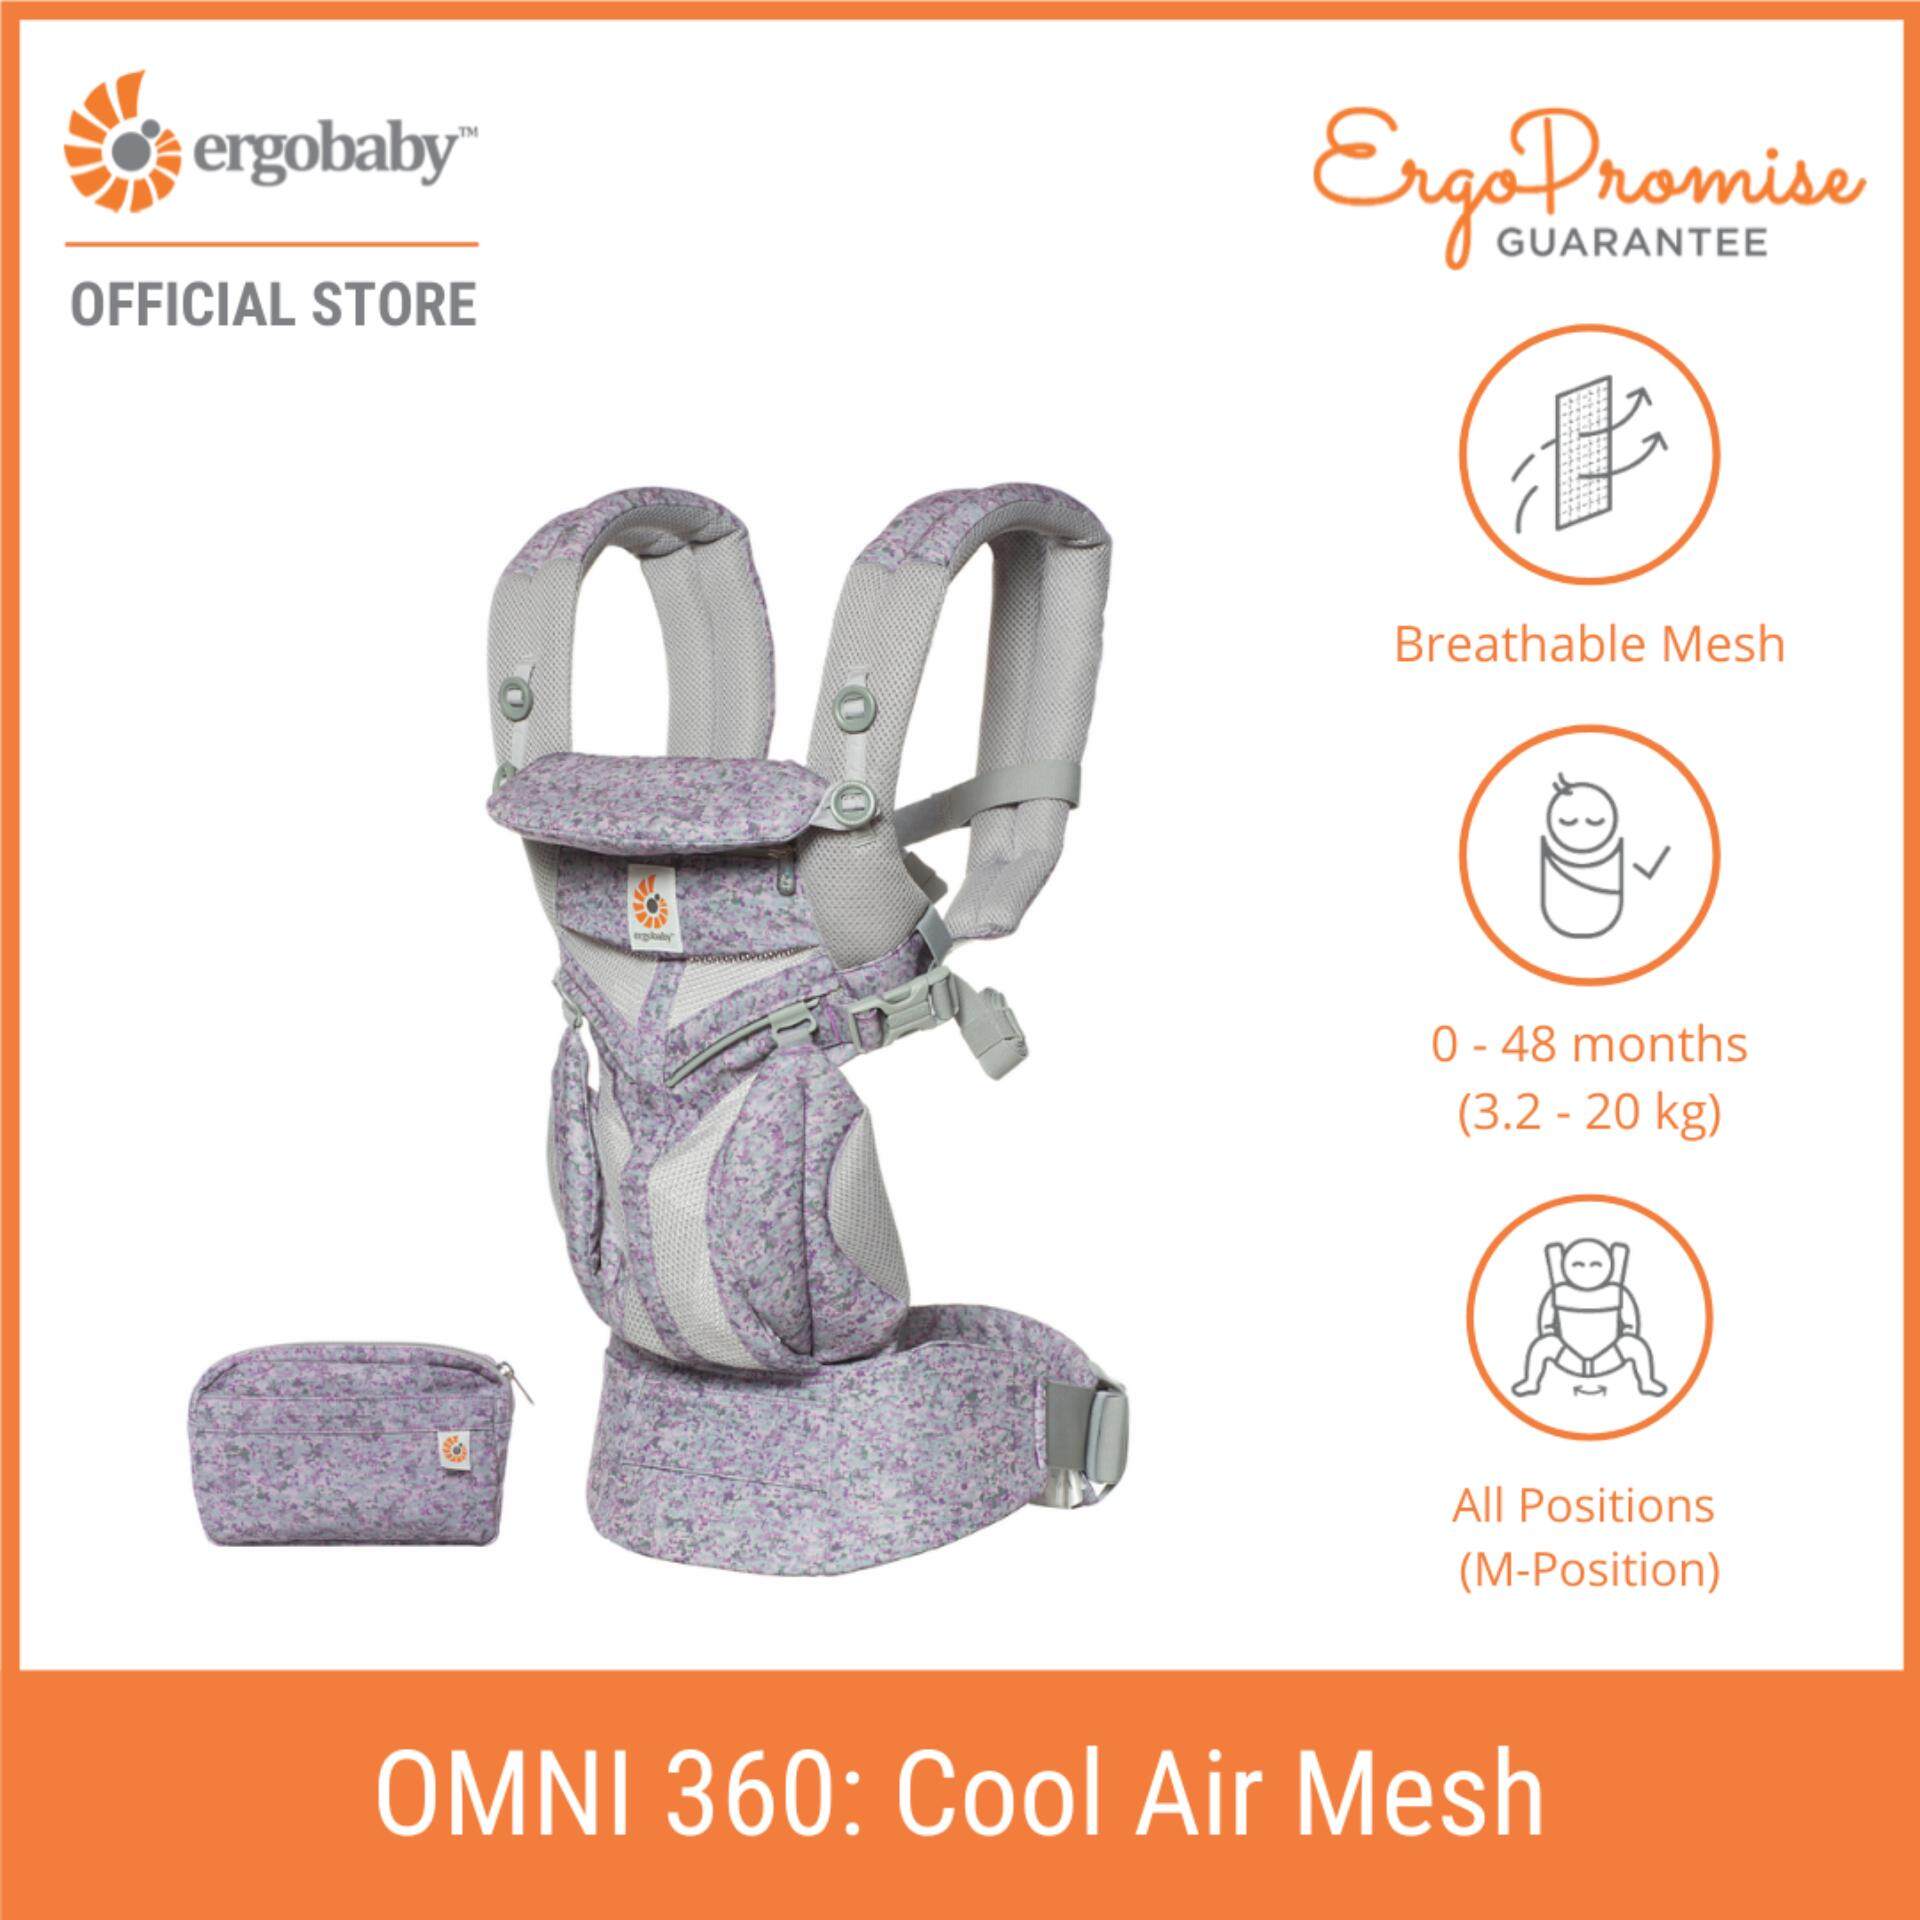 Ergobaby 360 Carrier Malaysia  Ergobaby Omni 360 Cool Air Mesh All-In-One  Baby Carrier